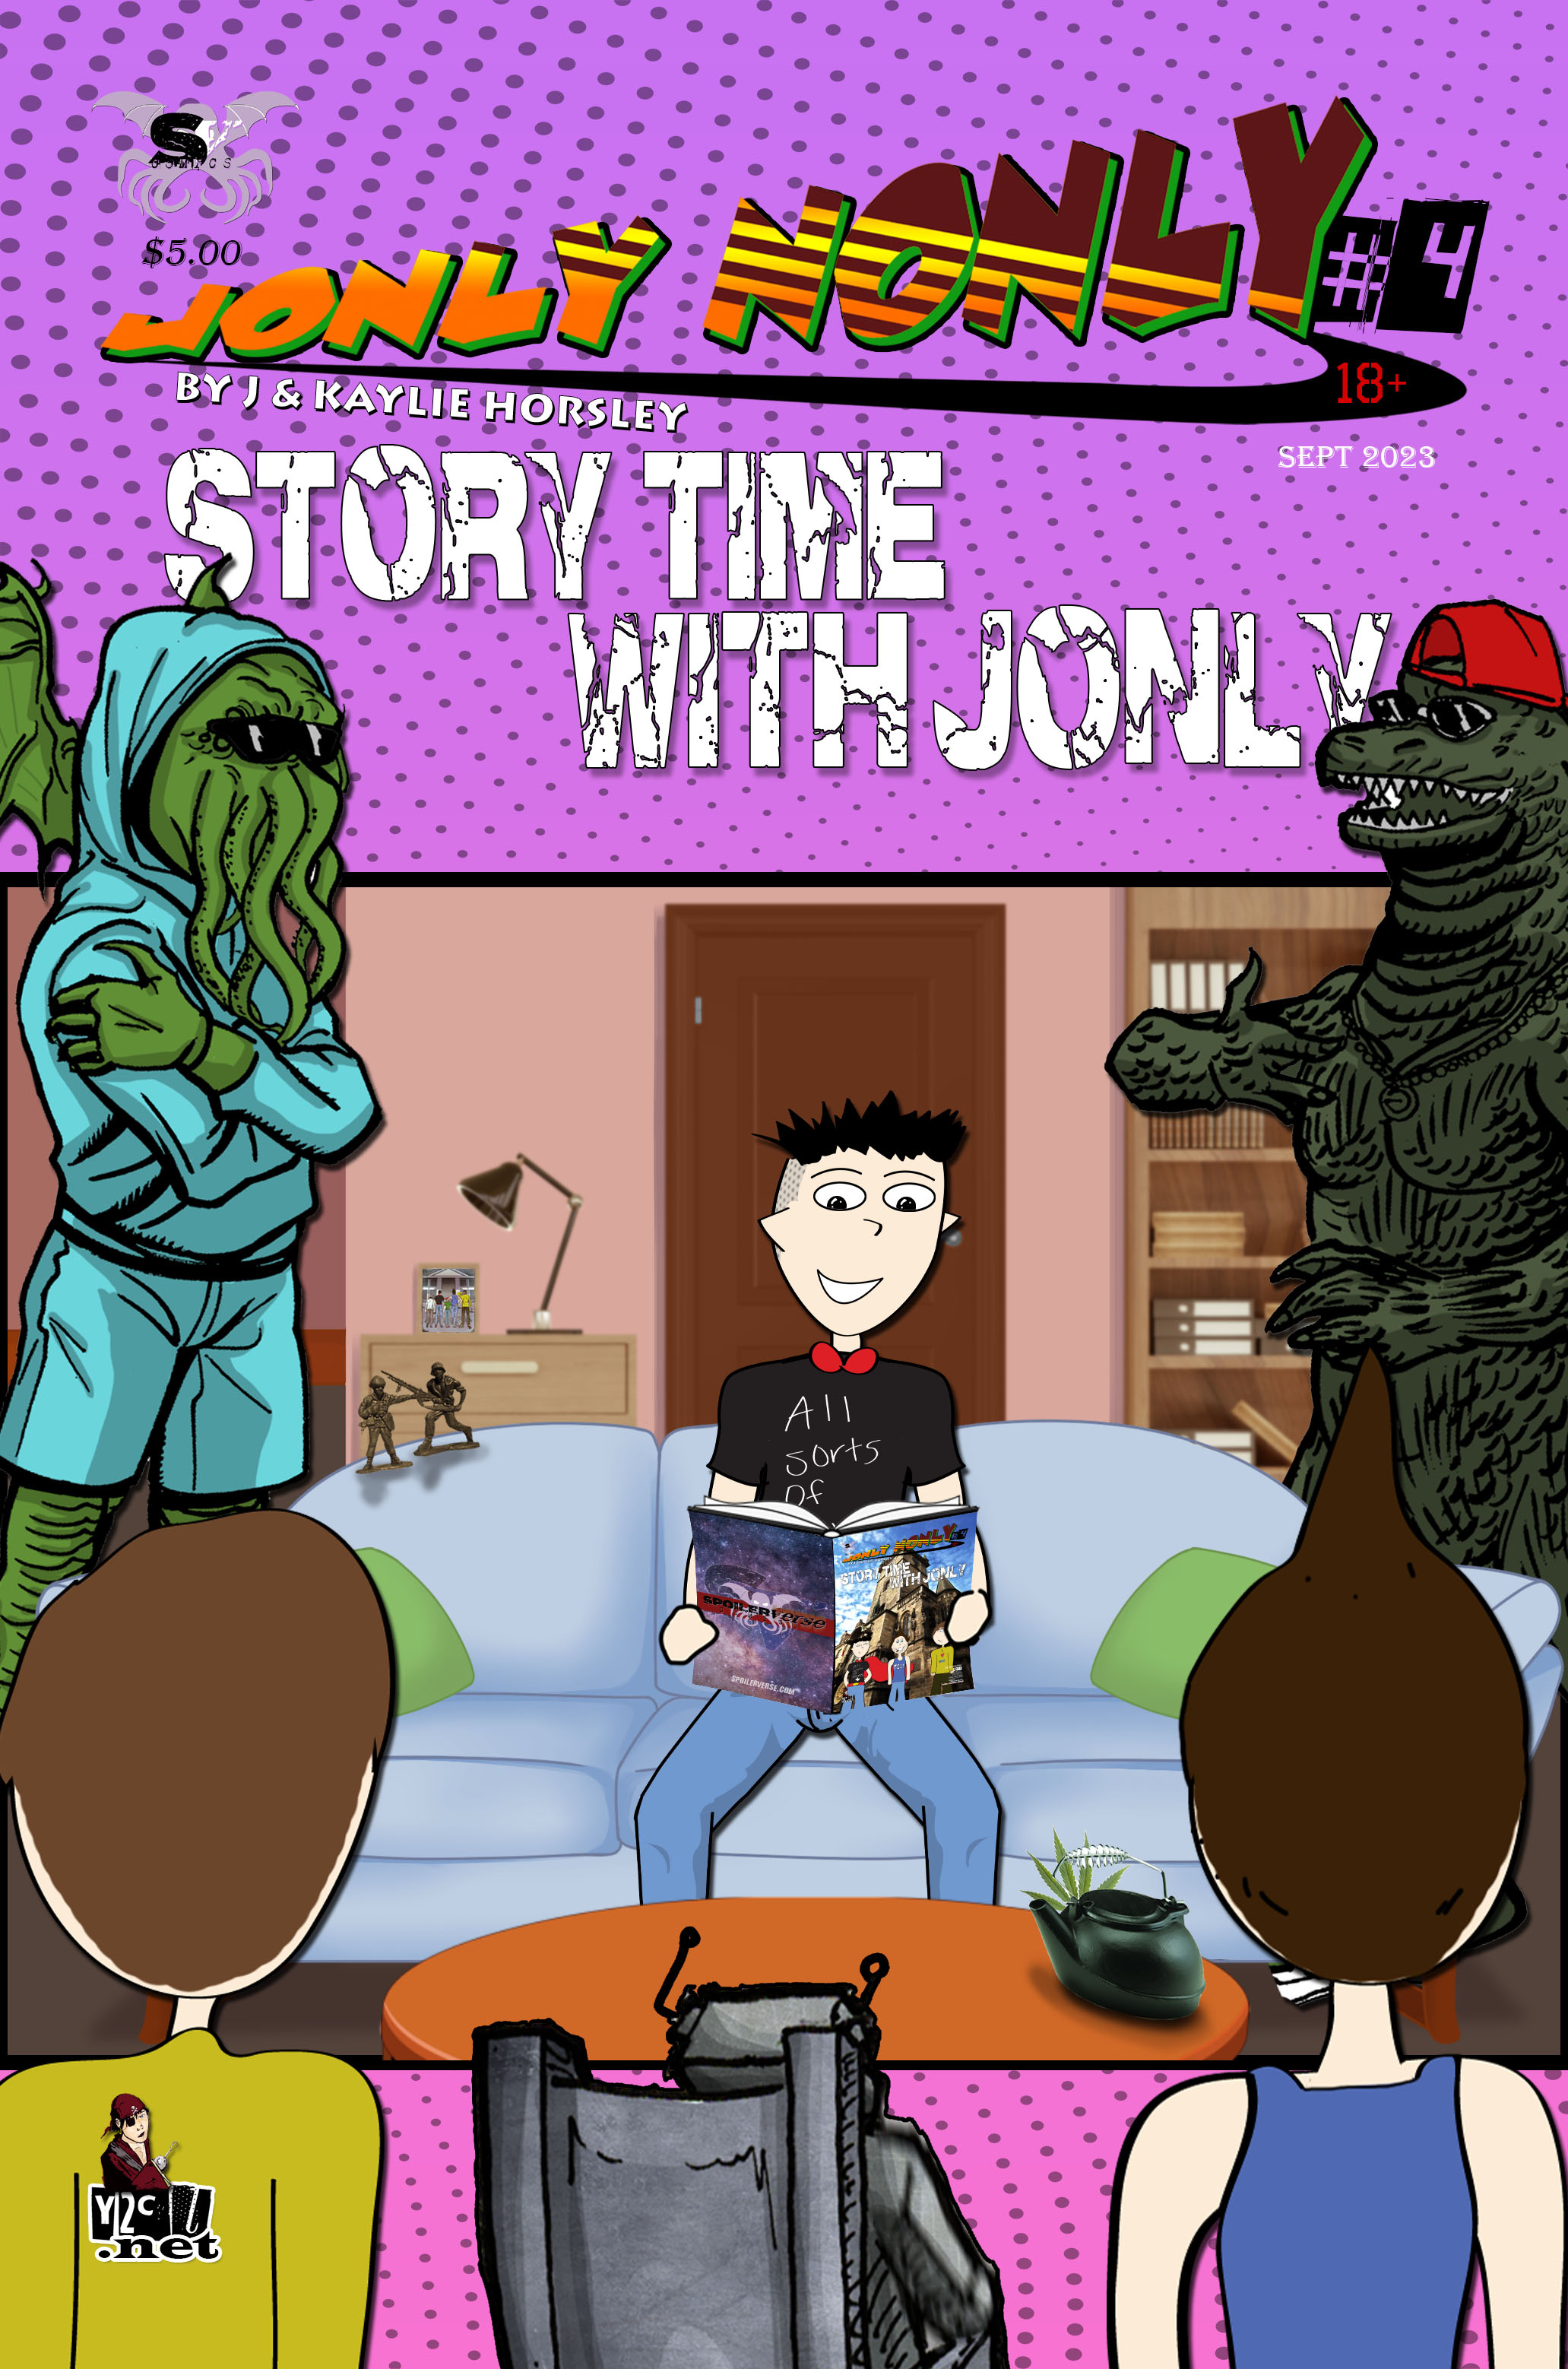 Jonly Nonly #4 - Story Time with Jonly